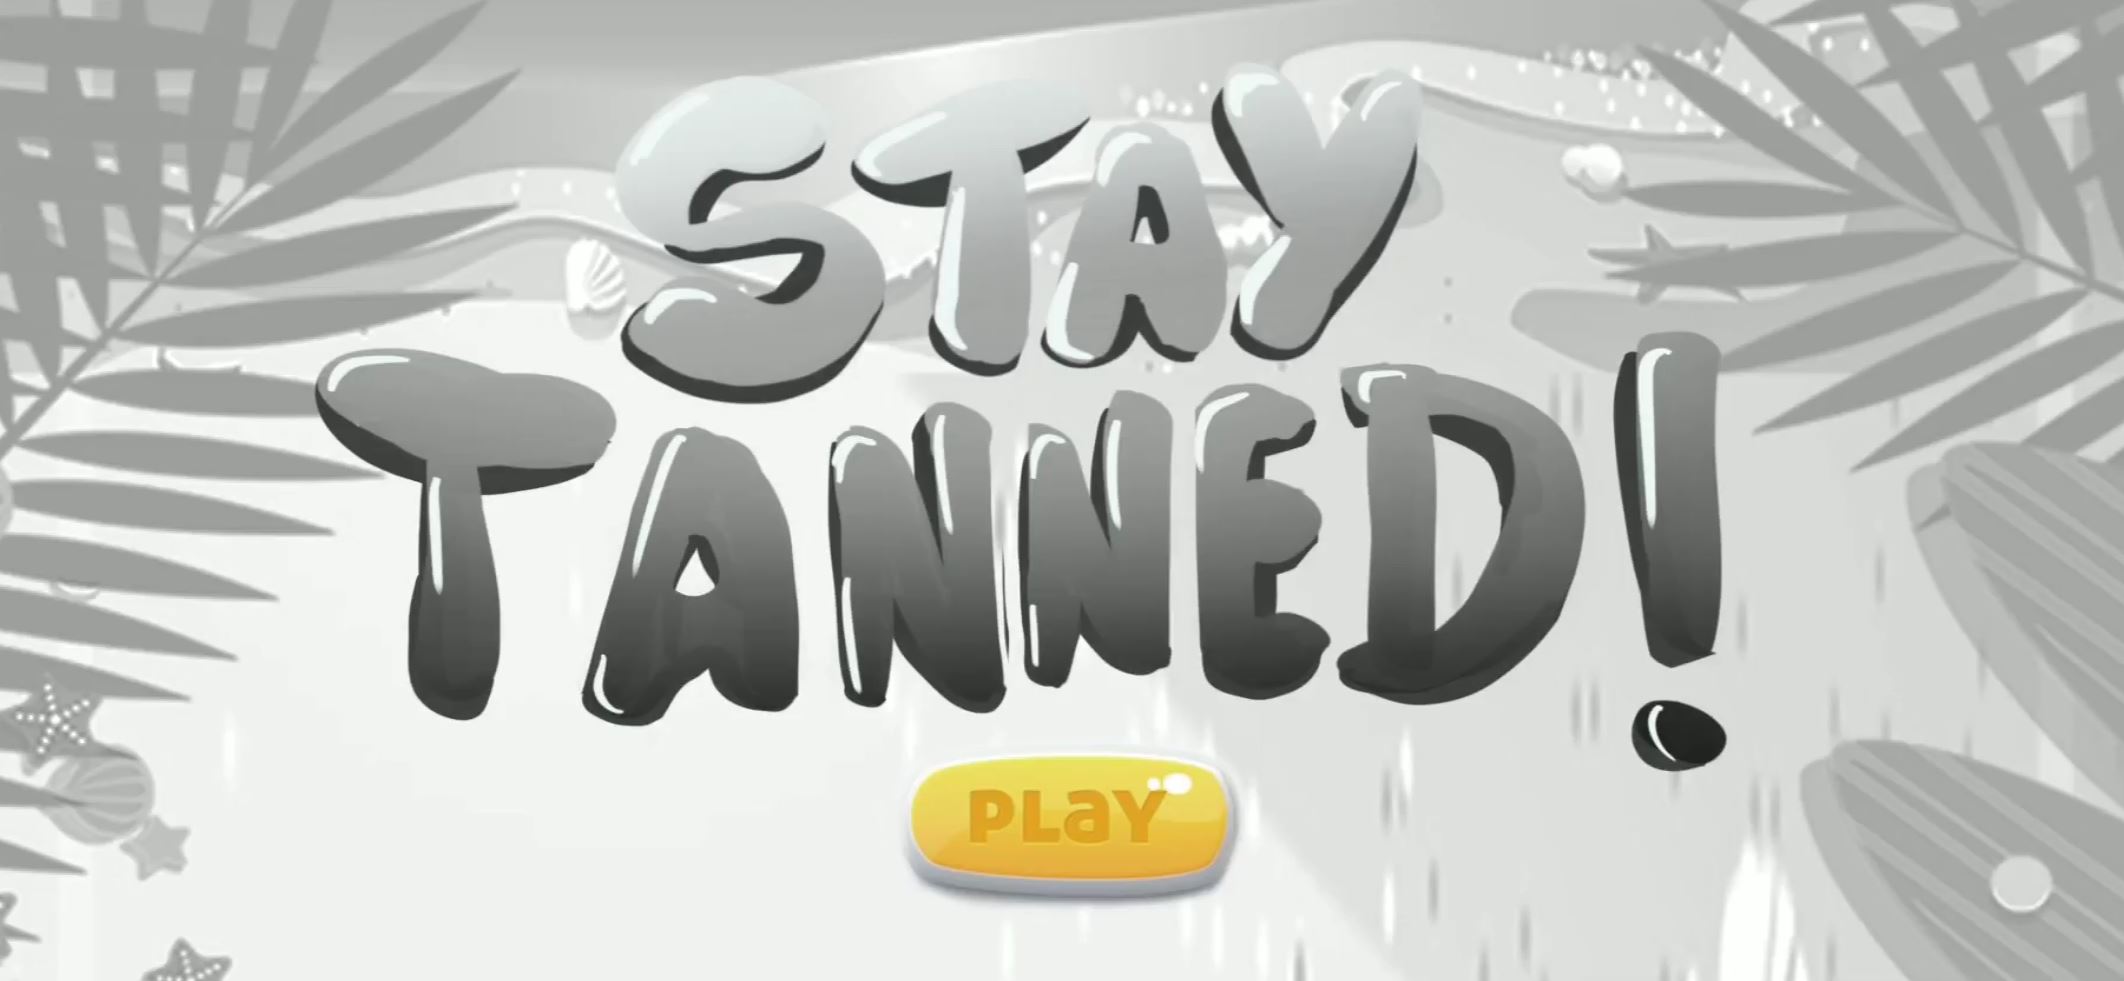 Stay Tanned! Game prototype